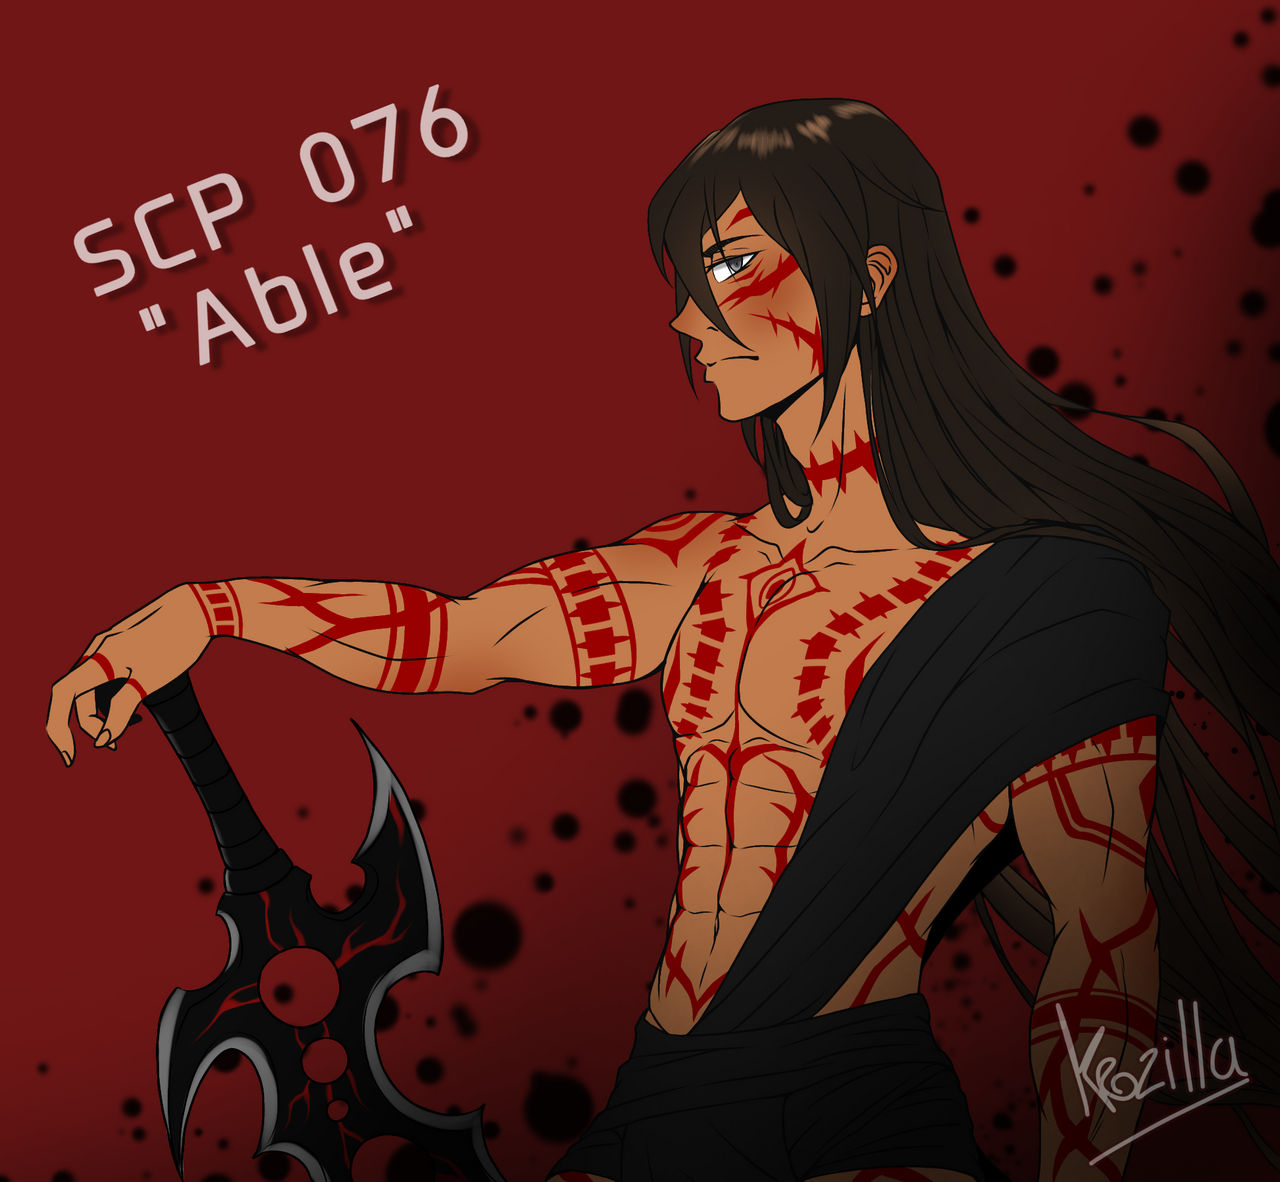 SCPTober day 7, SCP-076: Abel/Able I've done some fanarts lately